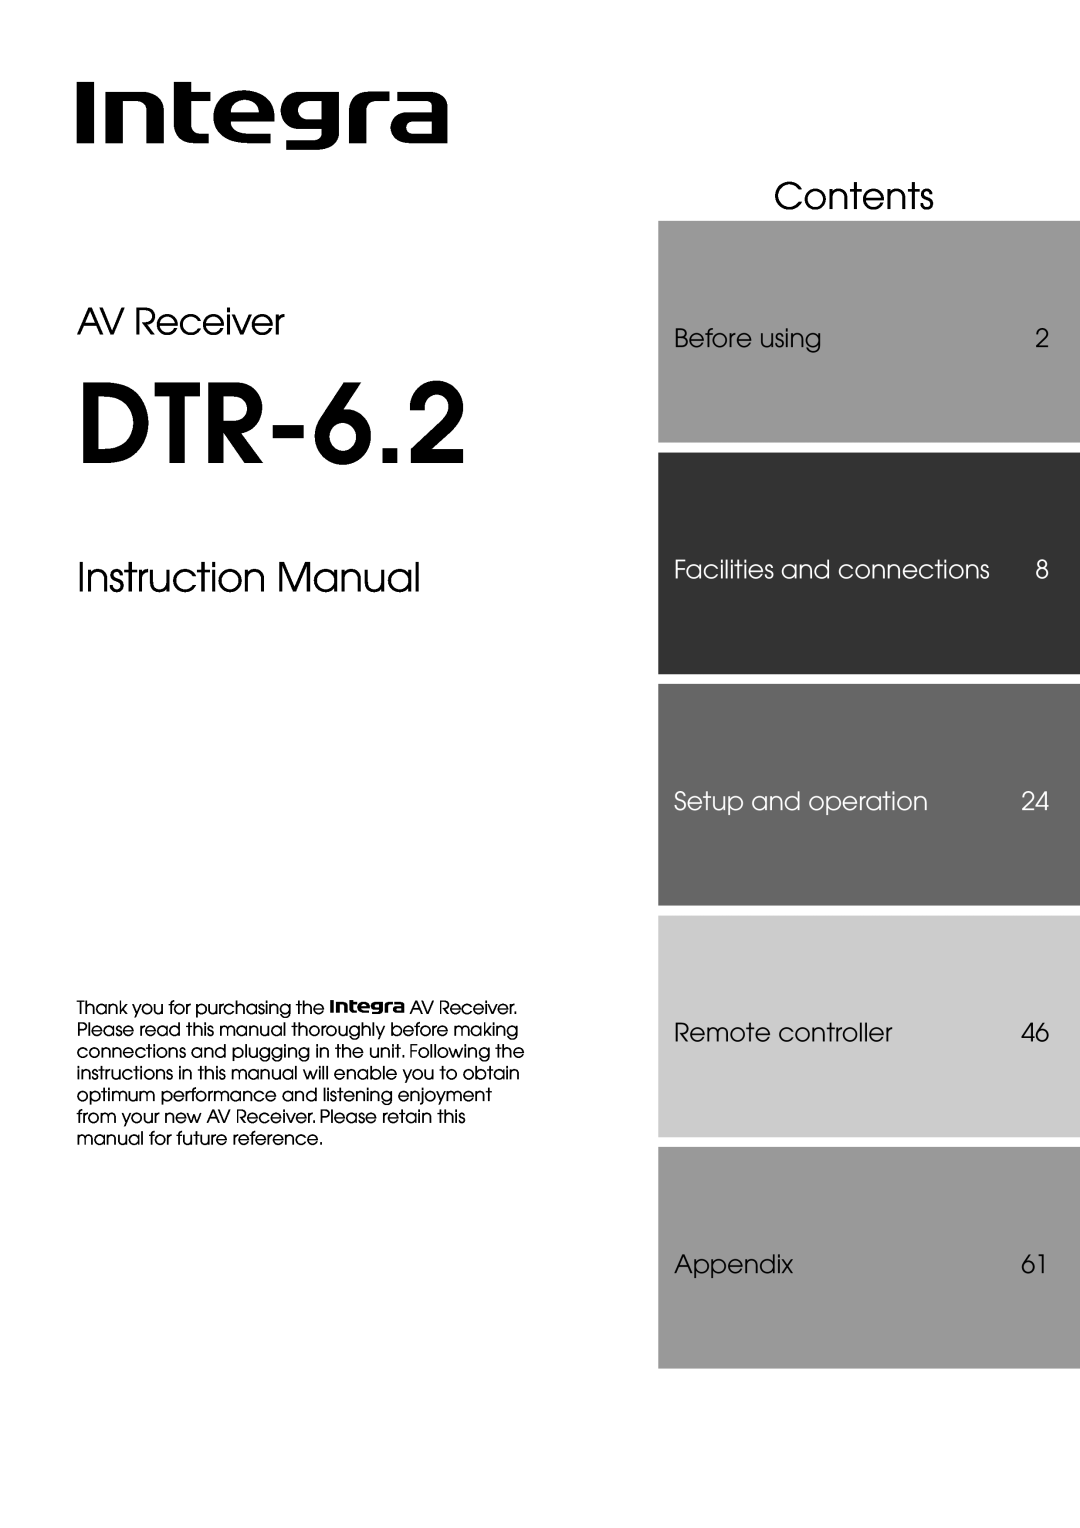 Integra DTR-6.2 instruction manual AV Receiver, Contents, Before using, Facilities and connections, Setup and operation 